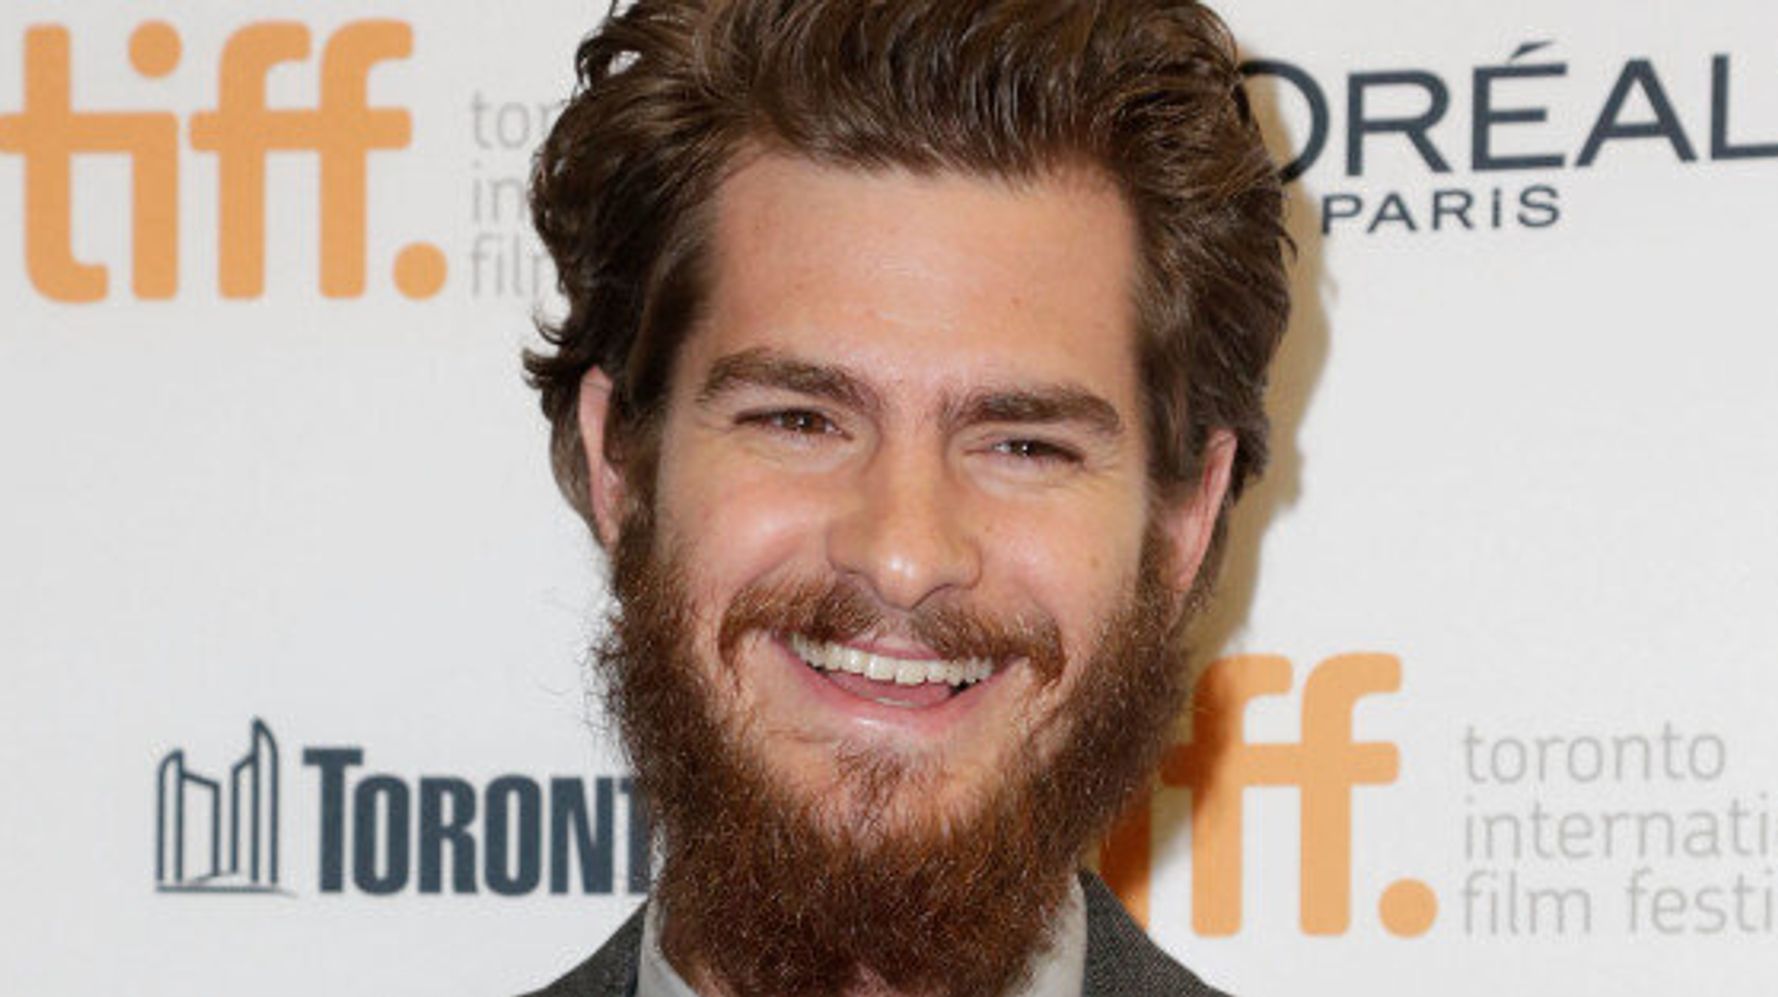 Andrew Garfield And His Massive Beard Are A Hit.